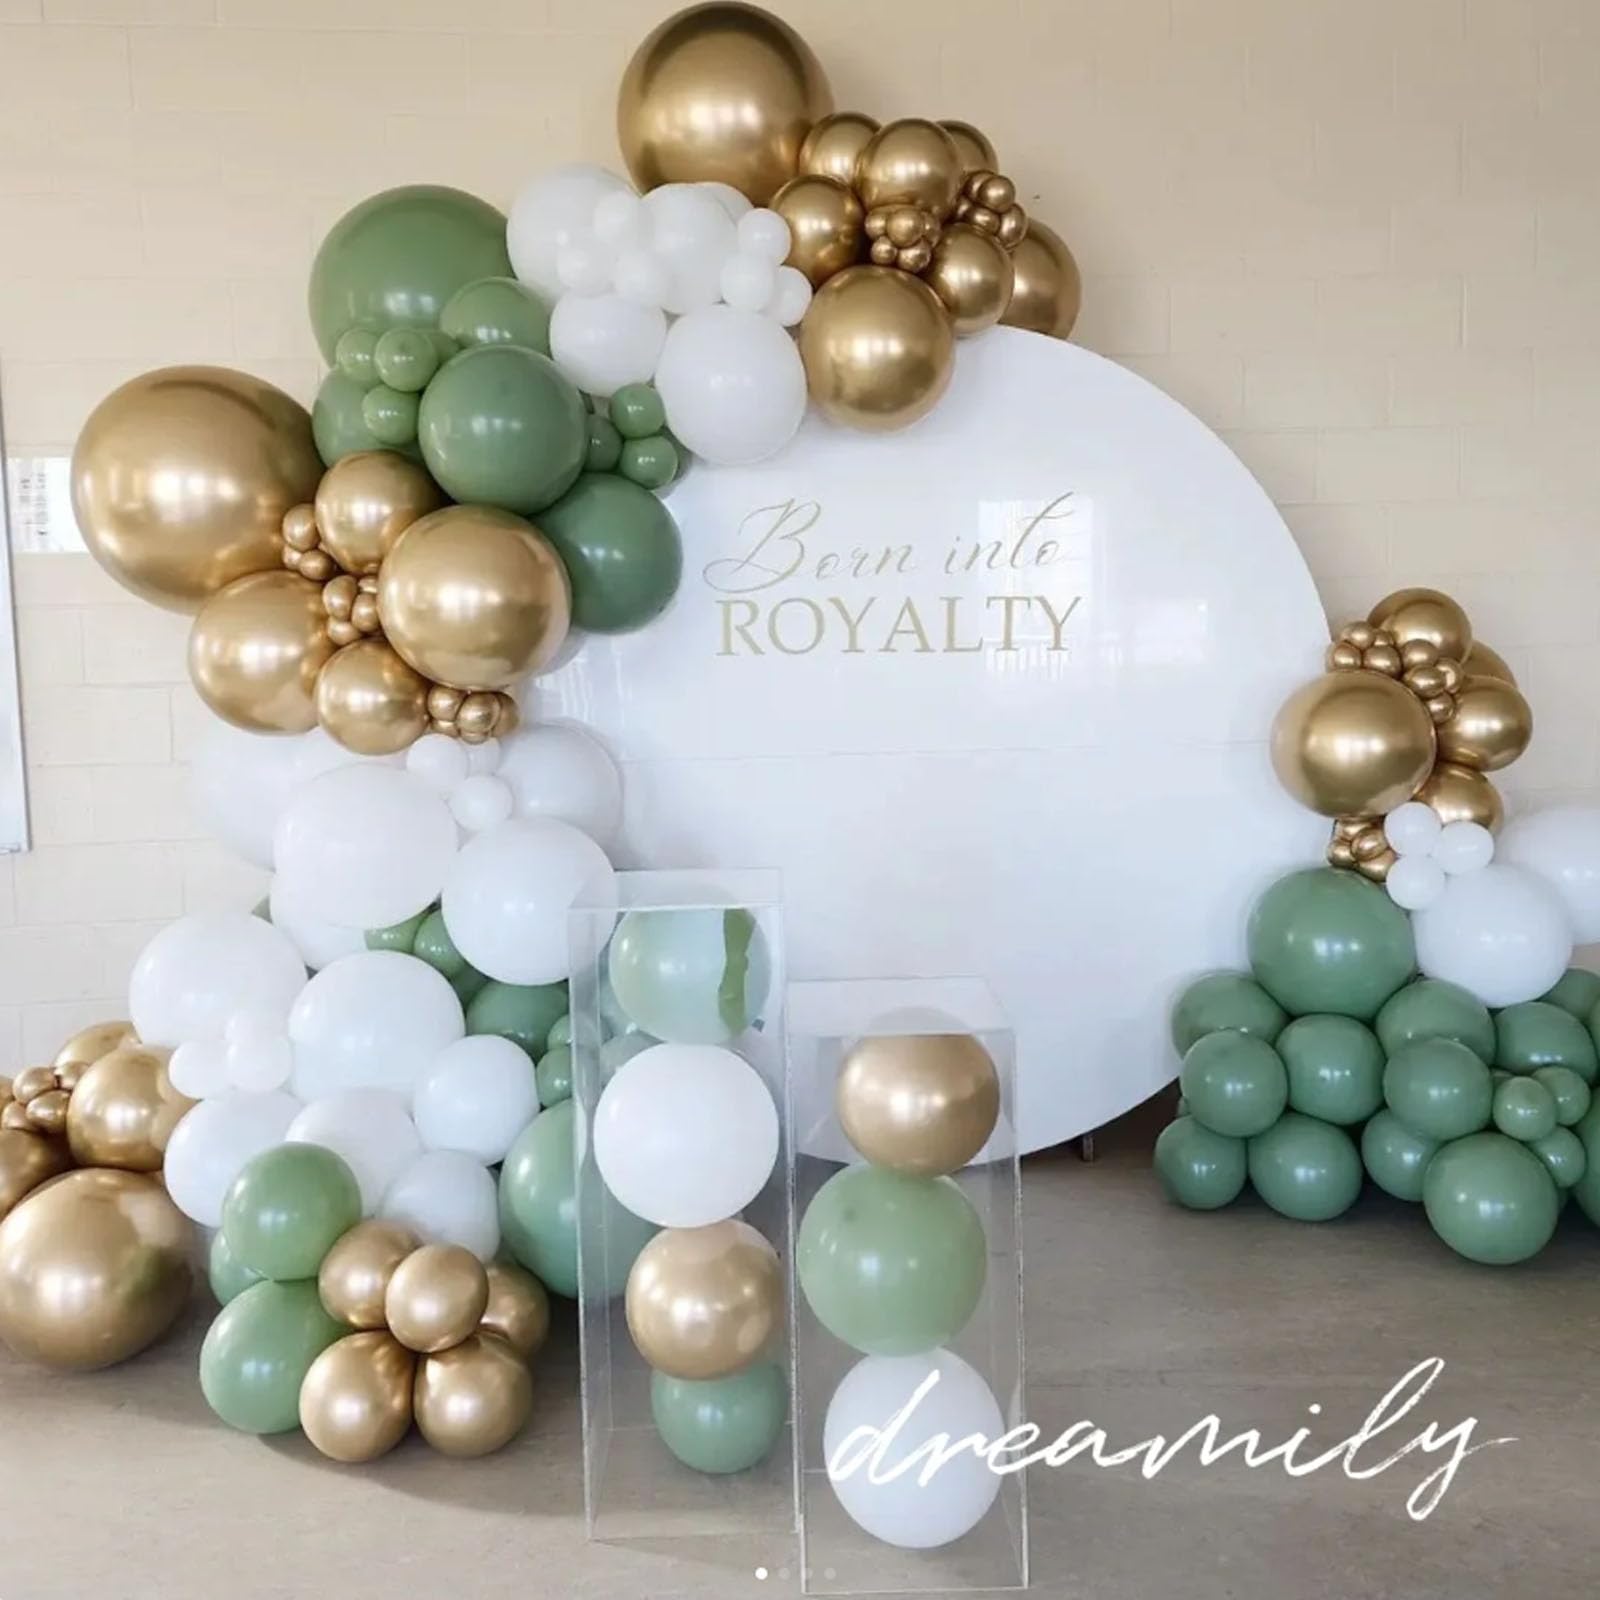 20Pcs 12 Inches Sage Green Gold and White Balloons, 5 x Metallic Gold Balloons, 5 x Sage Green Balloons, 5 x White Balloons, 5 x Gold Confetti Balloons